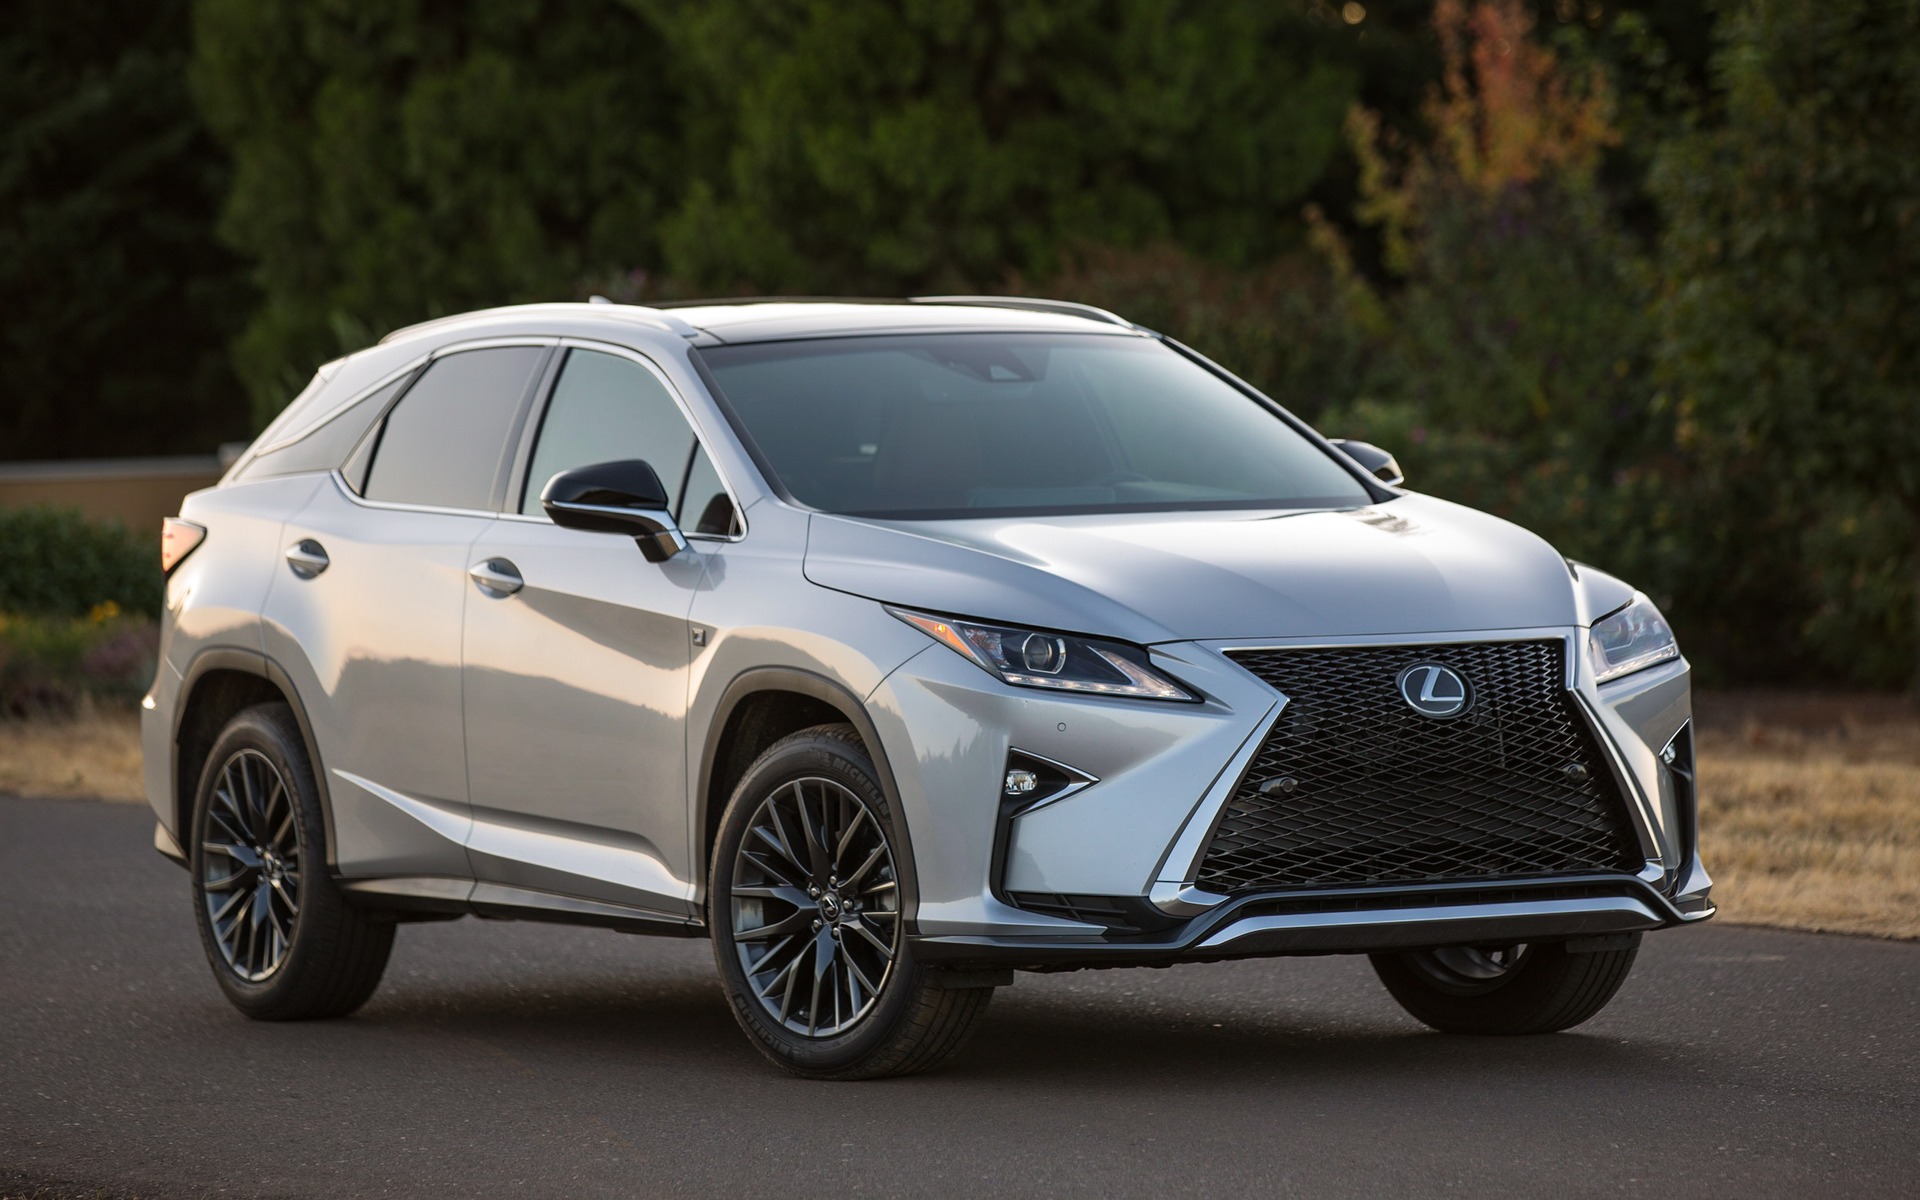 The 2016 Lexus RX 350 F SPORT gets the full-size spindle grille